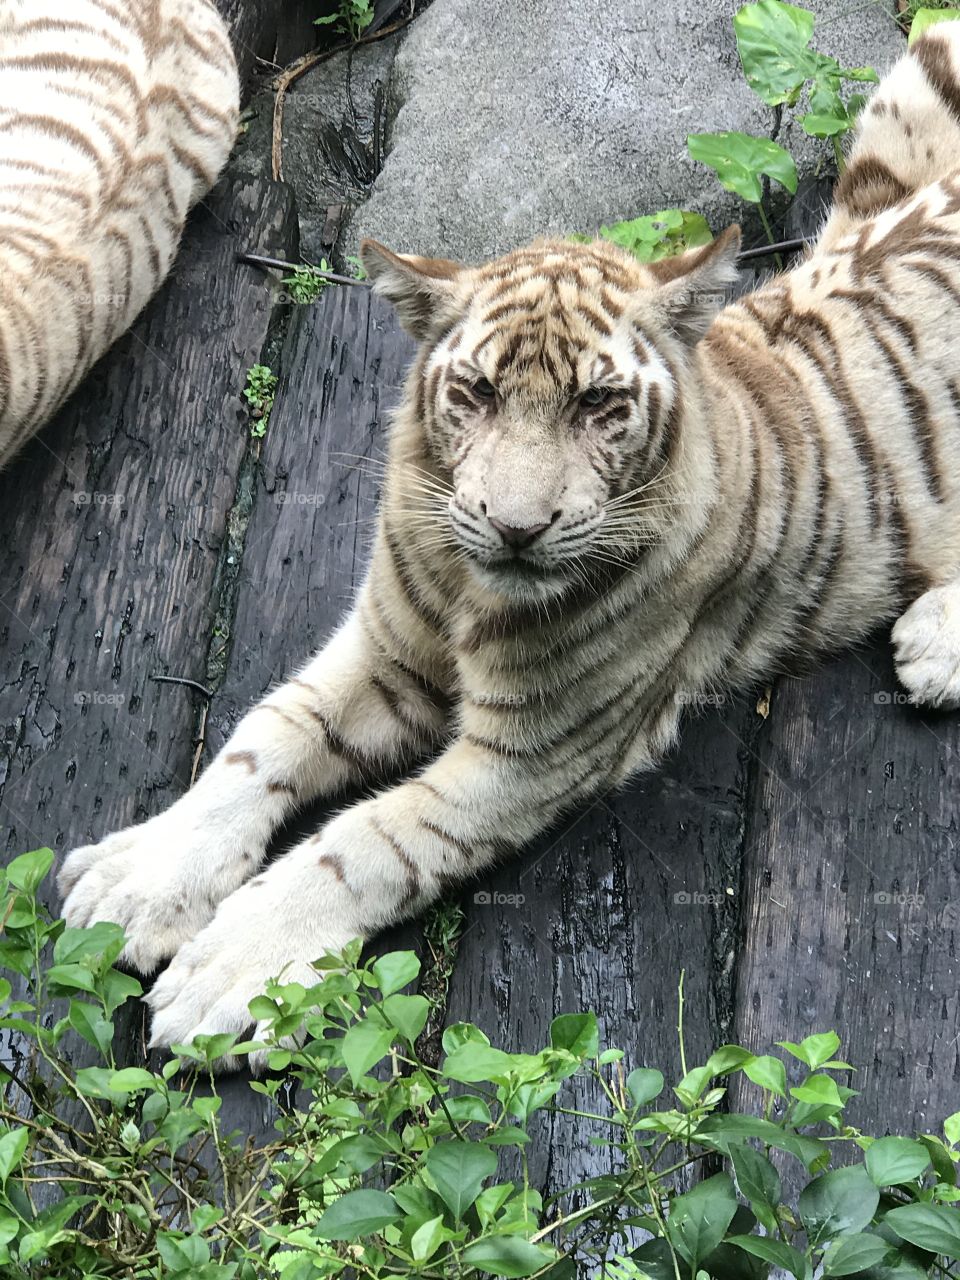 Tiger at the Chimelong zoo in China